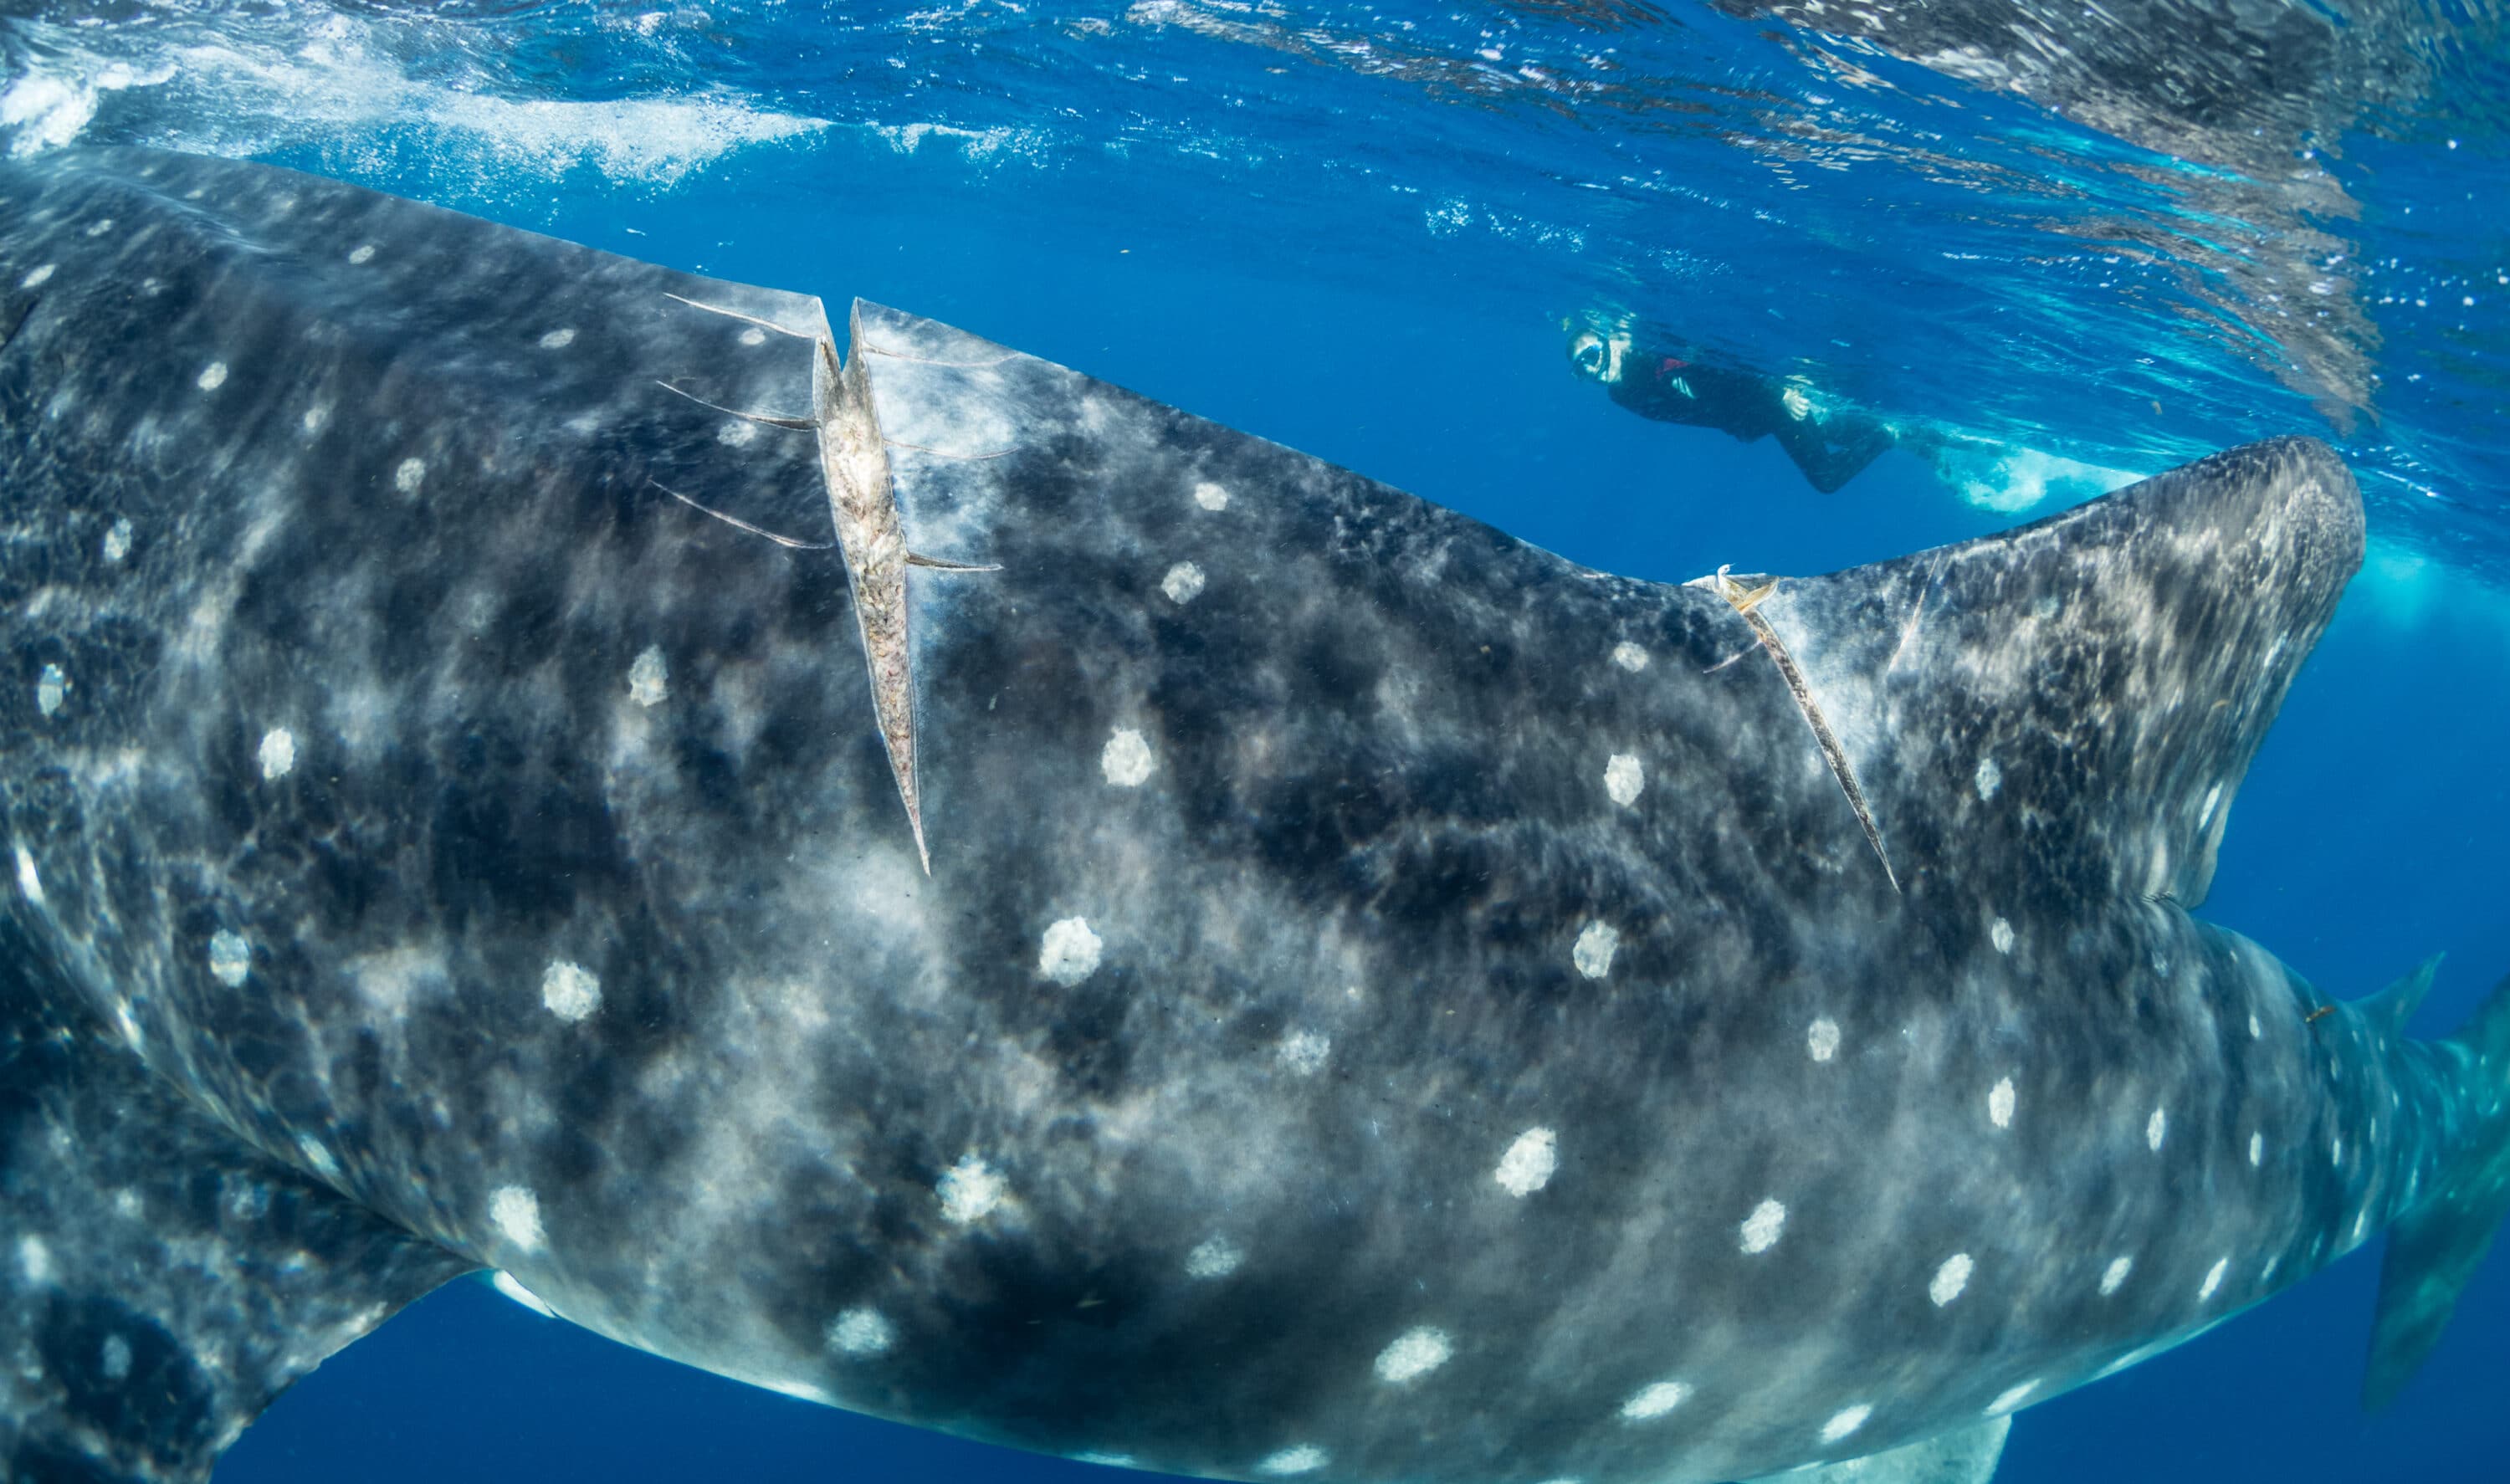 Ship collisions linked to deaths of endangered whale sharks